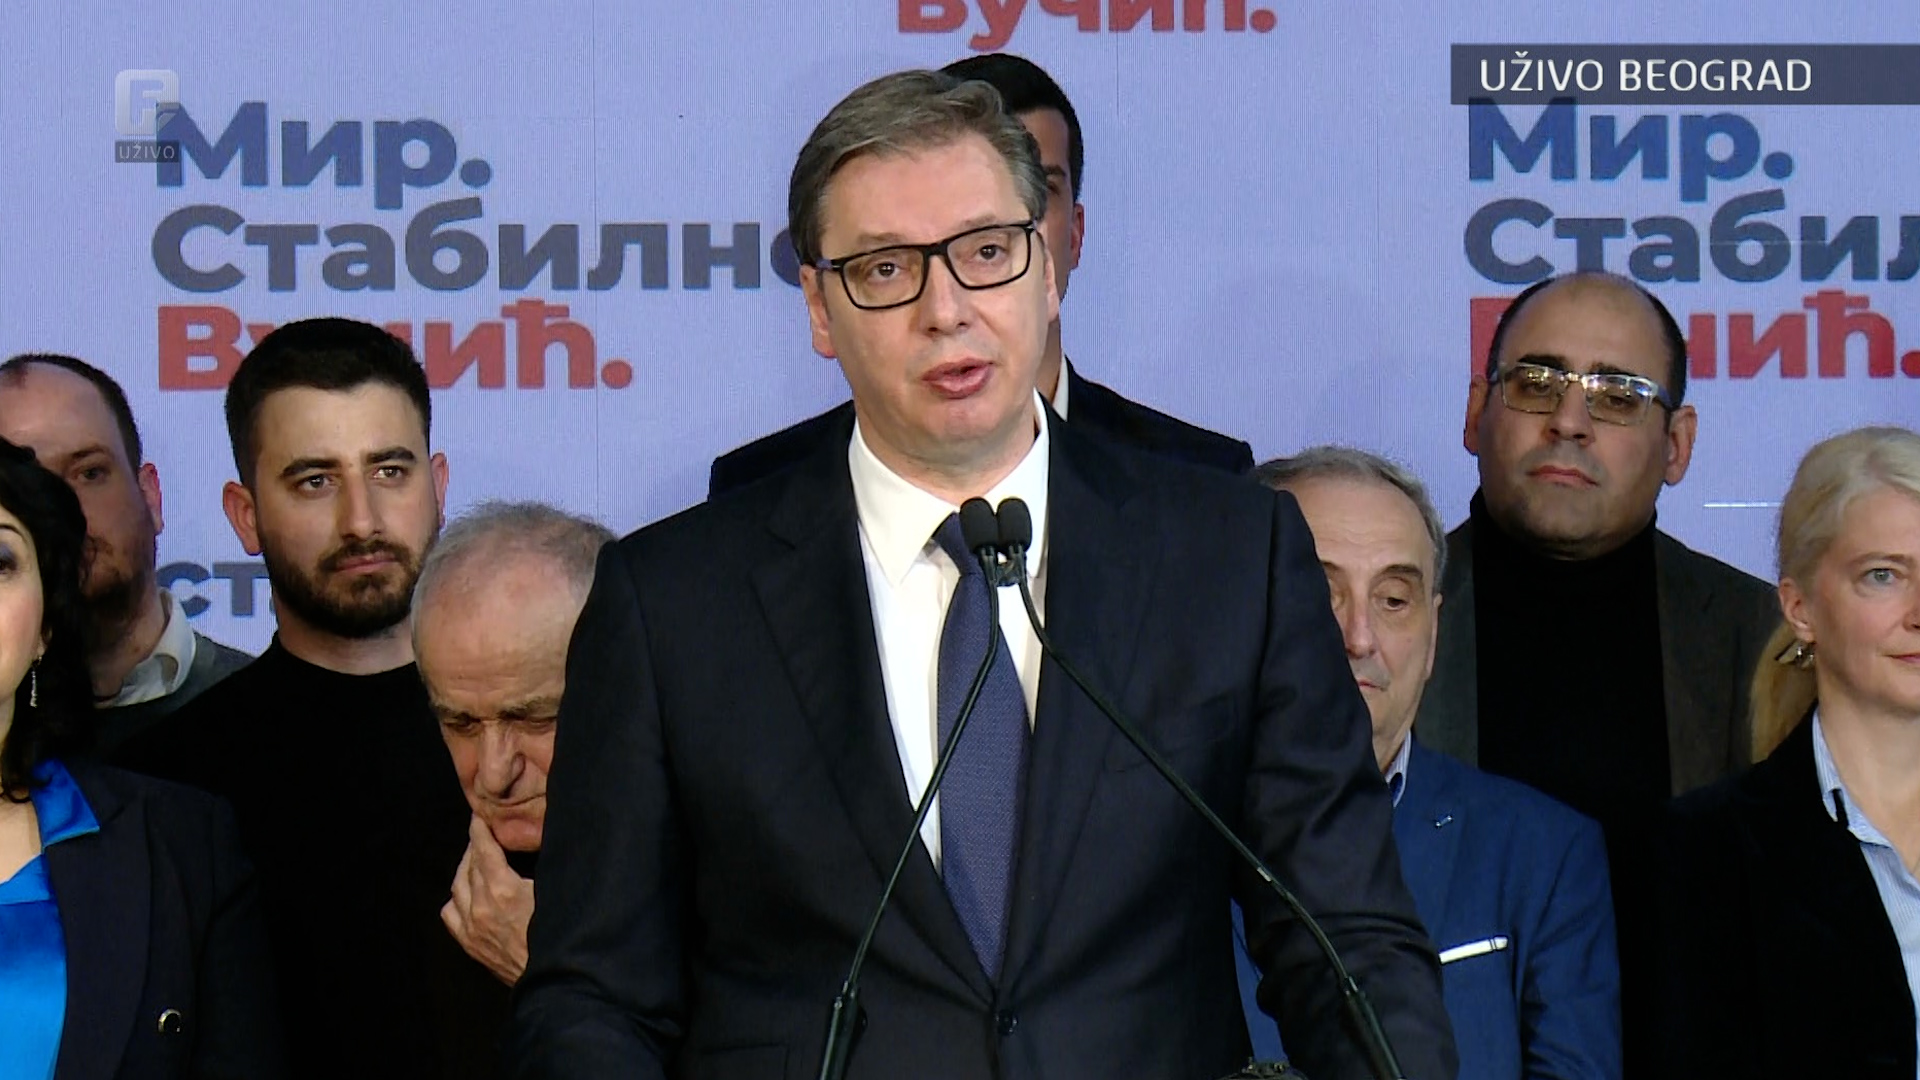 Elections in Serbia: Vučić set to win his 2nd term and his party SNS win 43% for Parliament